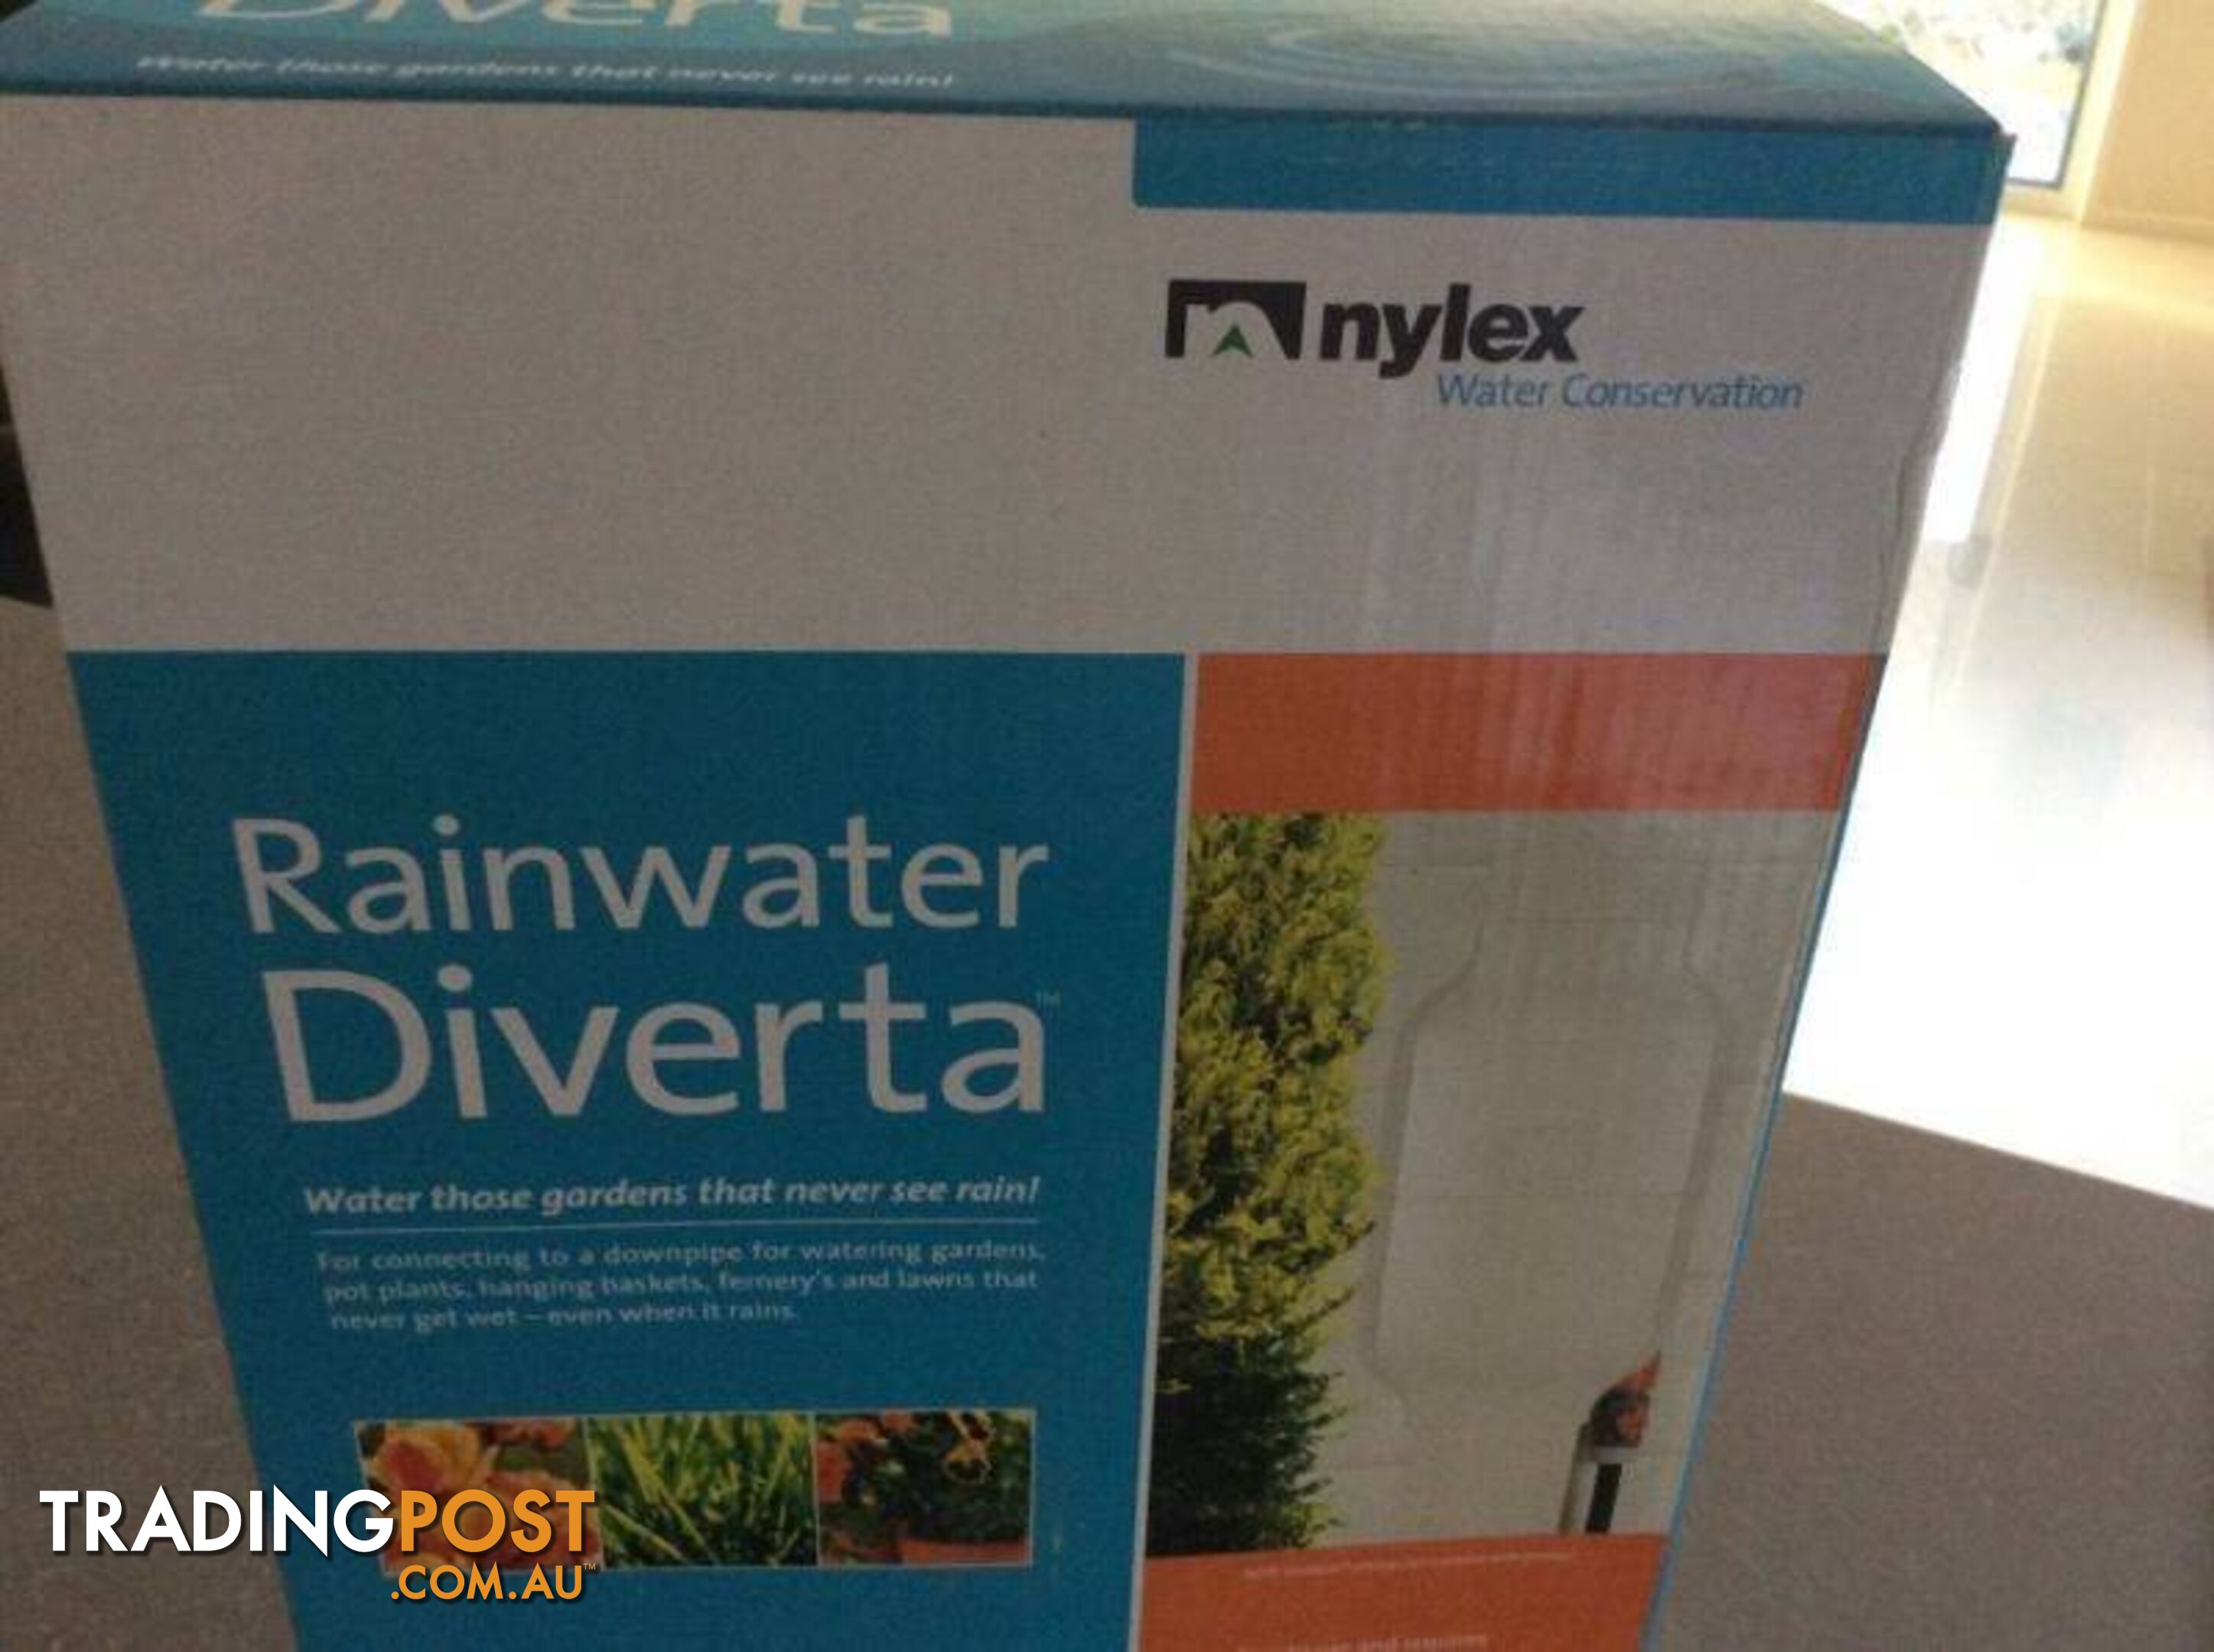 Rainwater Divertaª is designed to divert water from the down PIPE